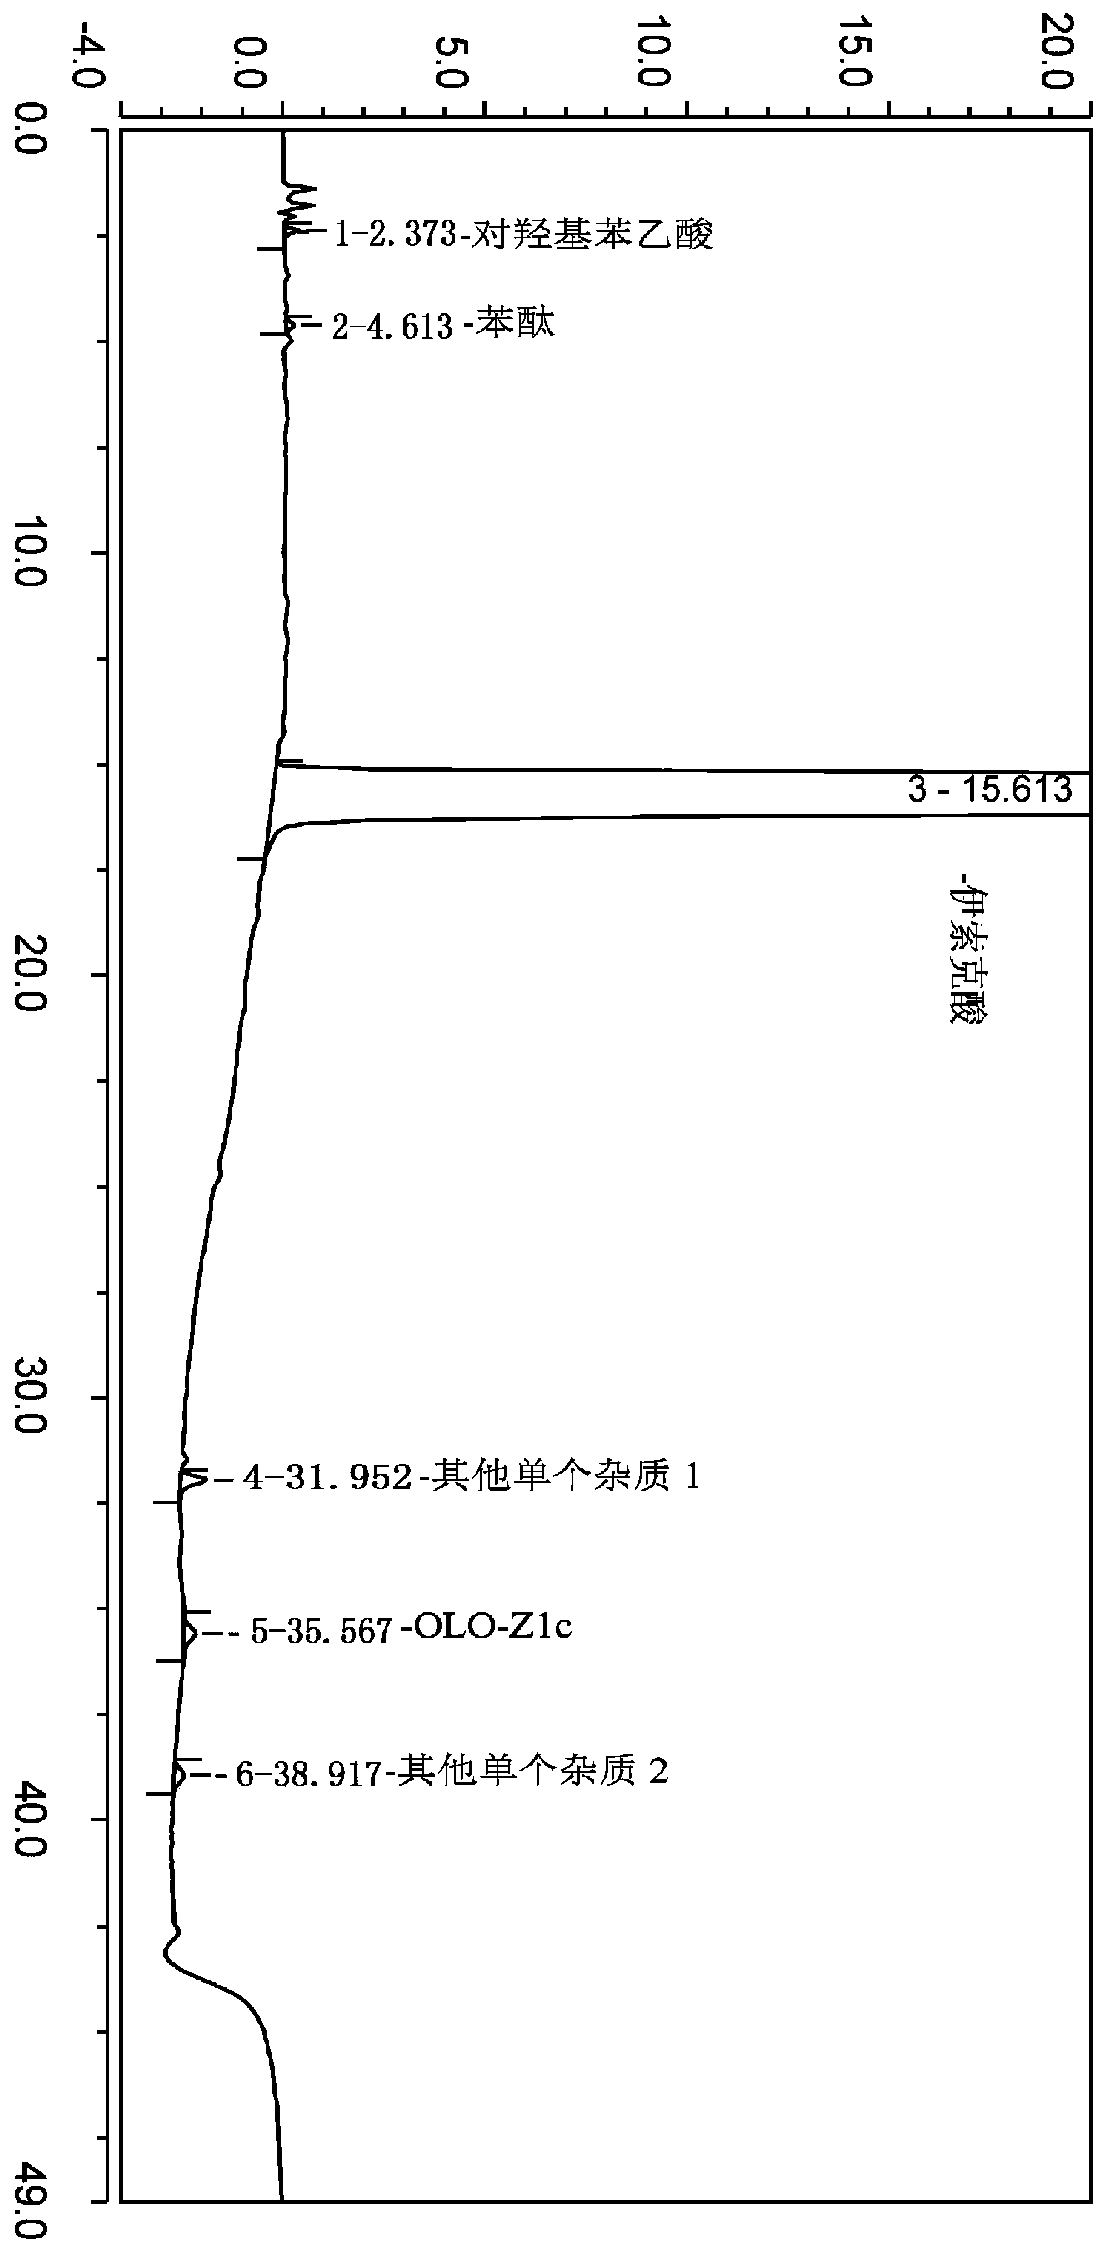 Method for the separation and determination of isoket acid and its related substances by hplc